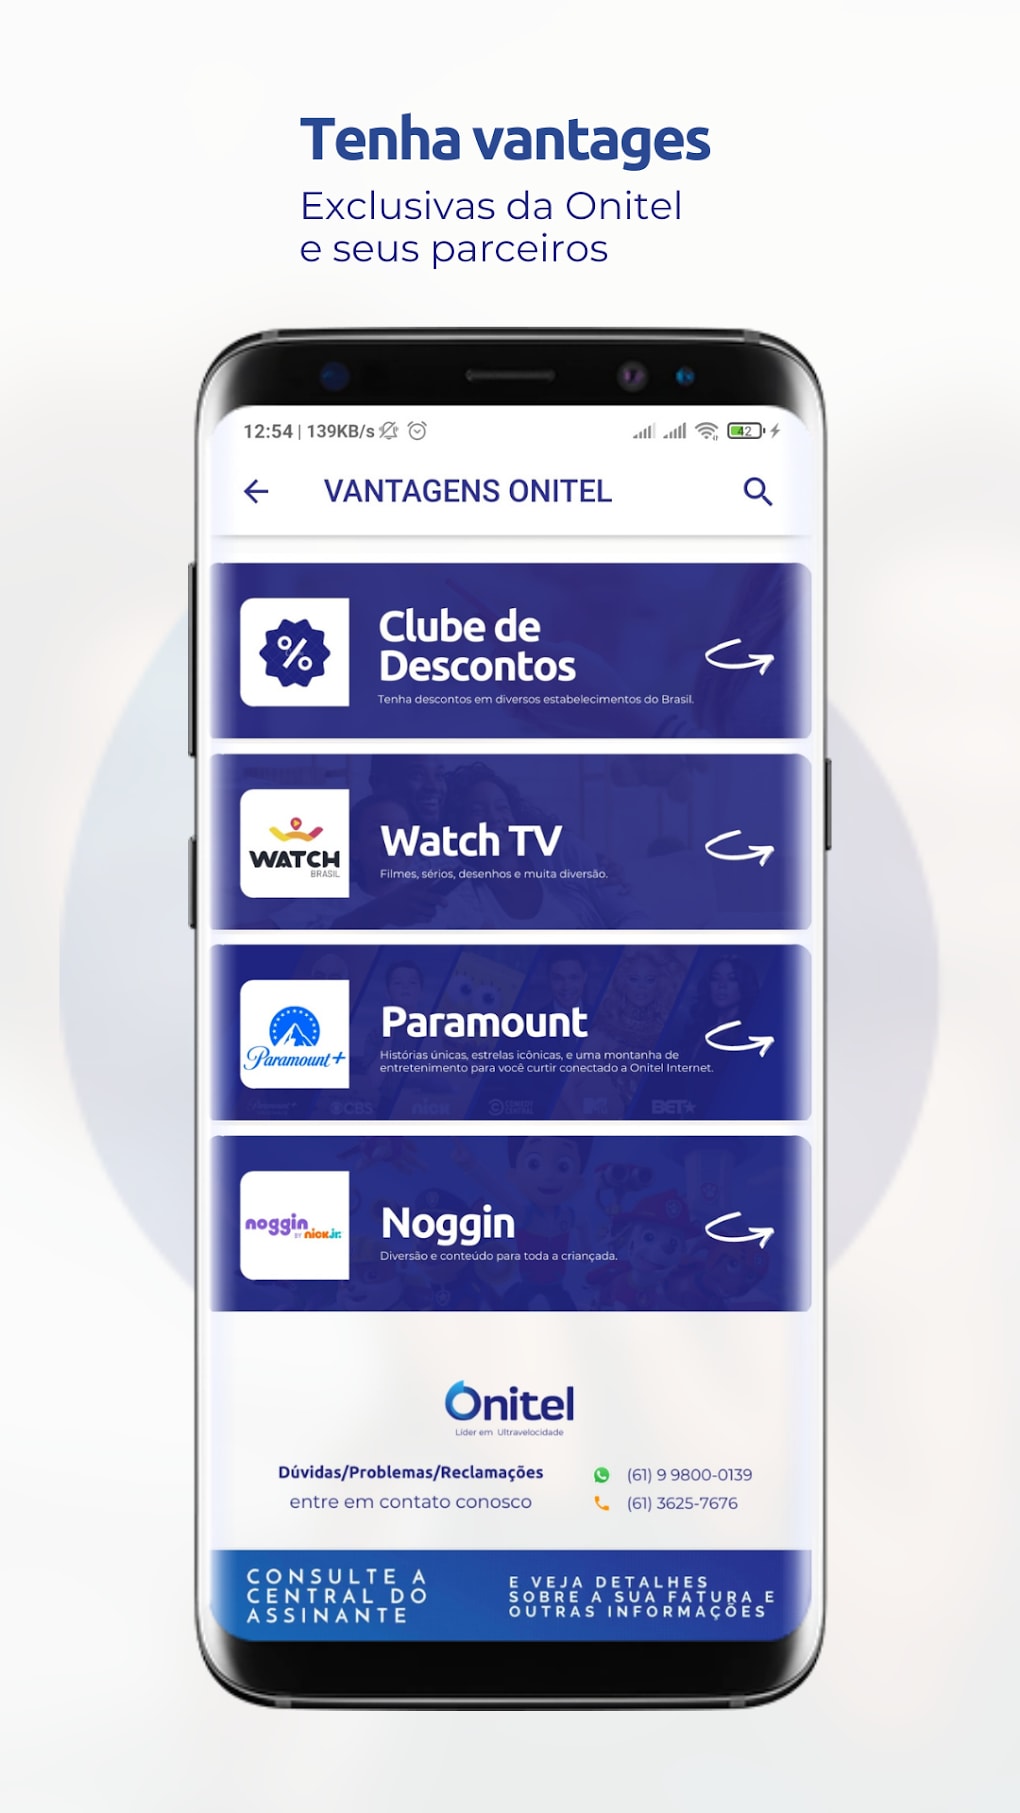 Android Apps by Onitel - Líder em Ultravelocidade on Google Play